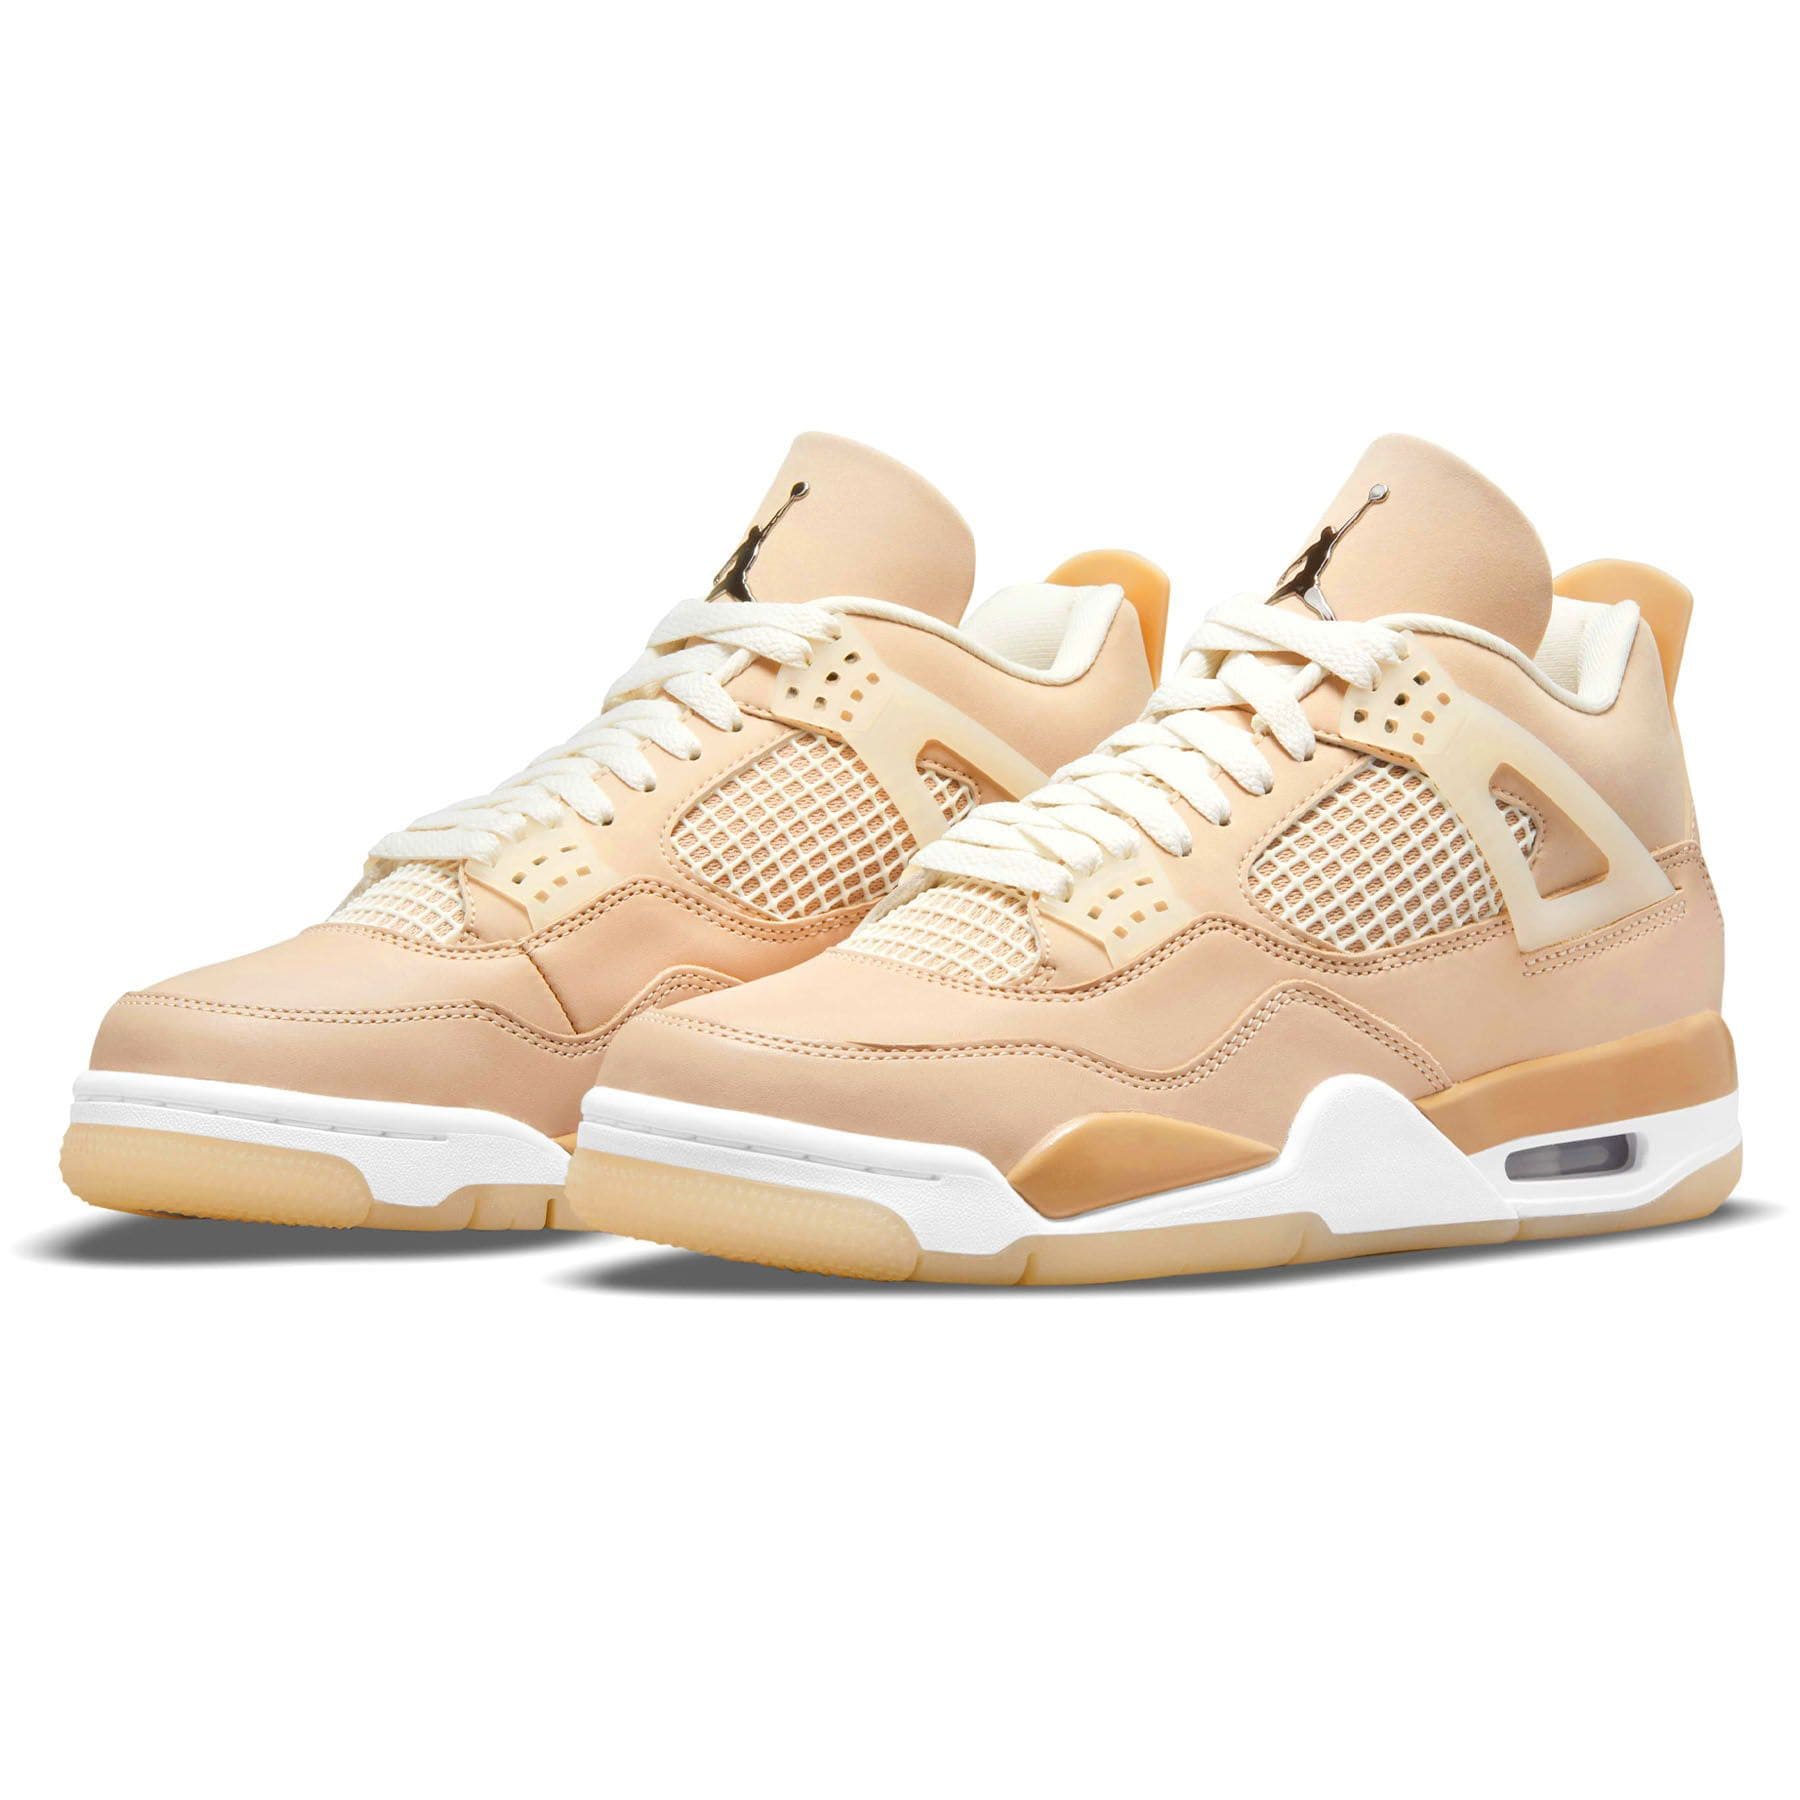 Double Boxed  499.99 Nike Air Jordan 4 Retro Shimmer (W) Double Boxed